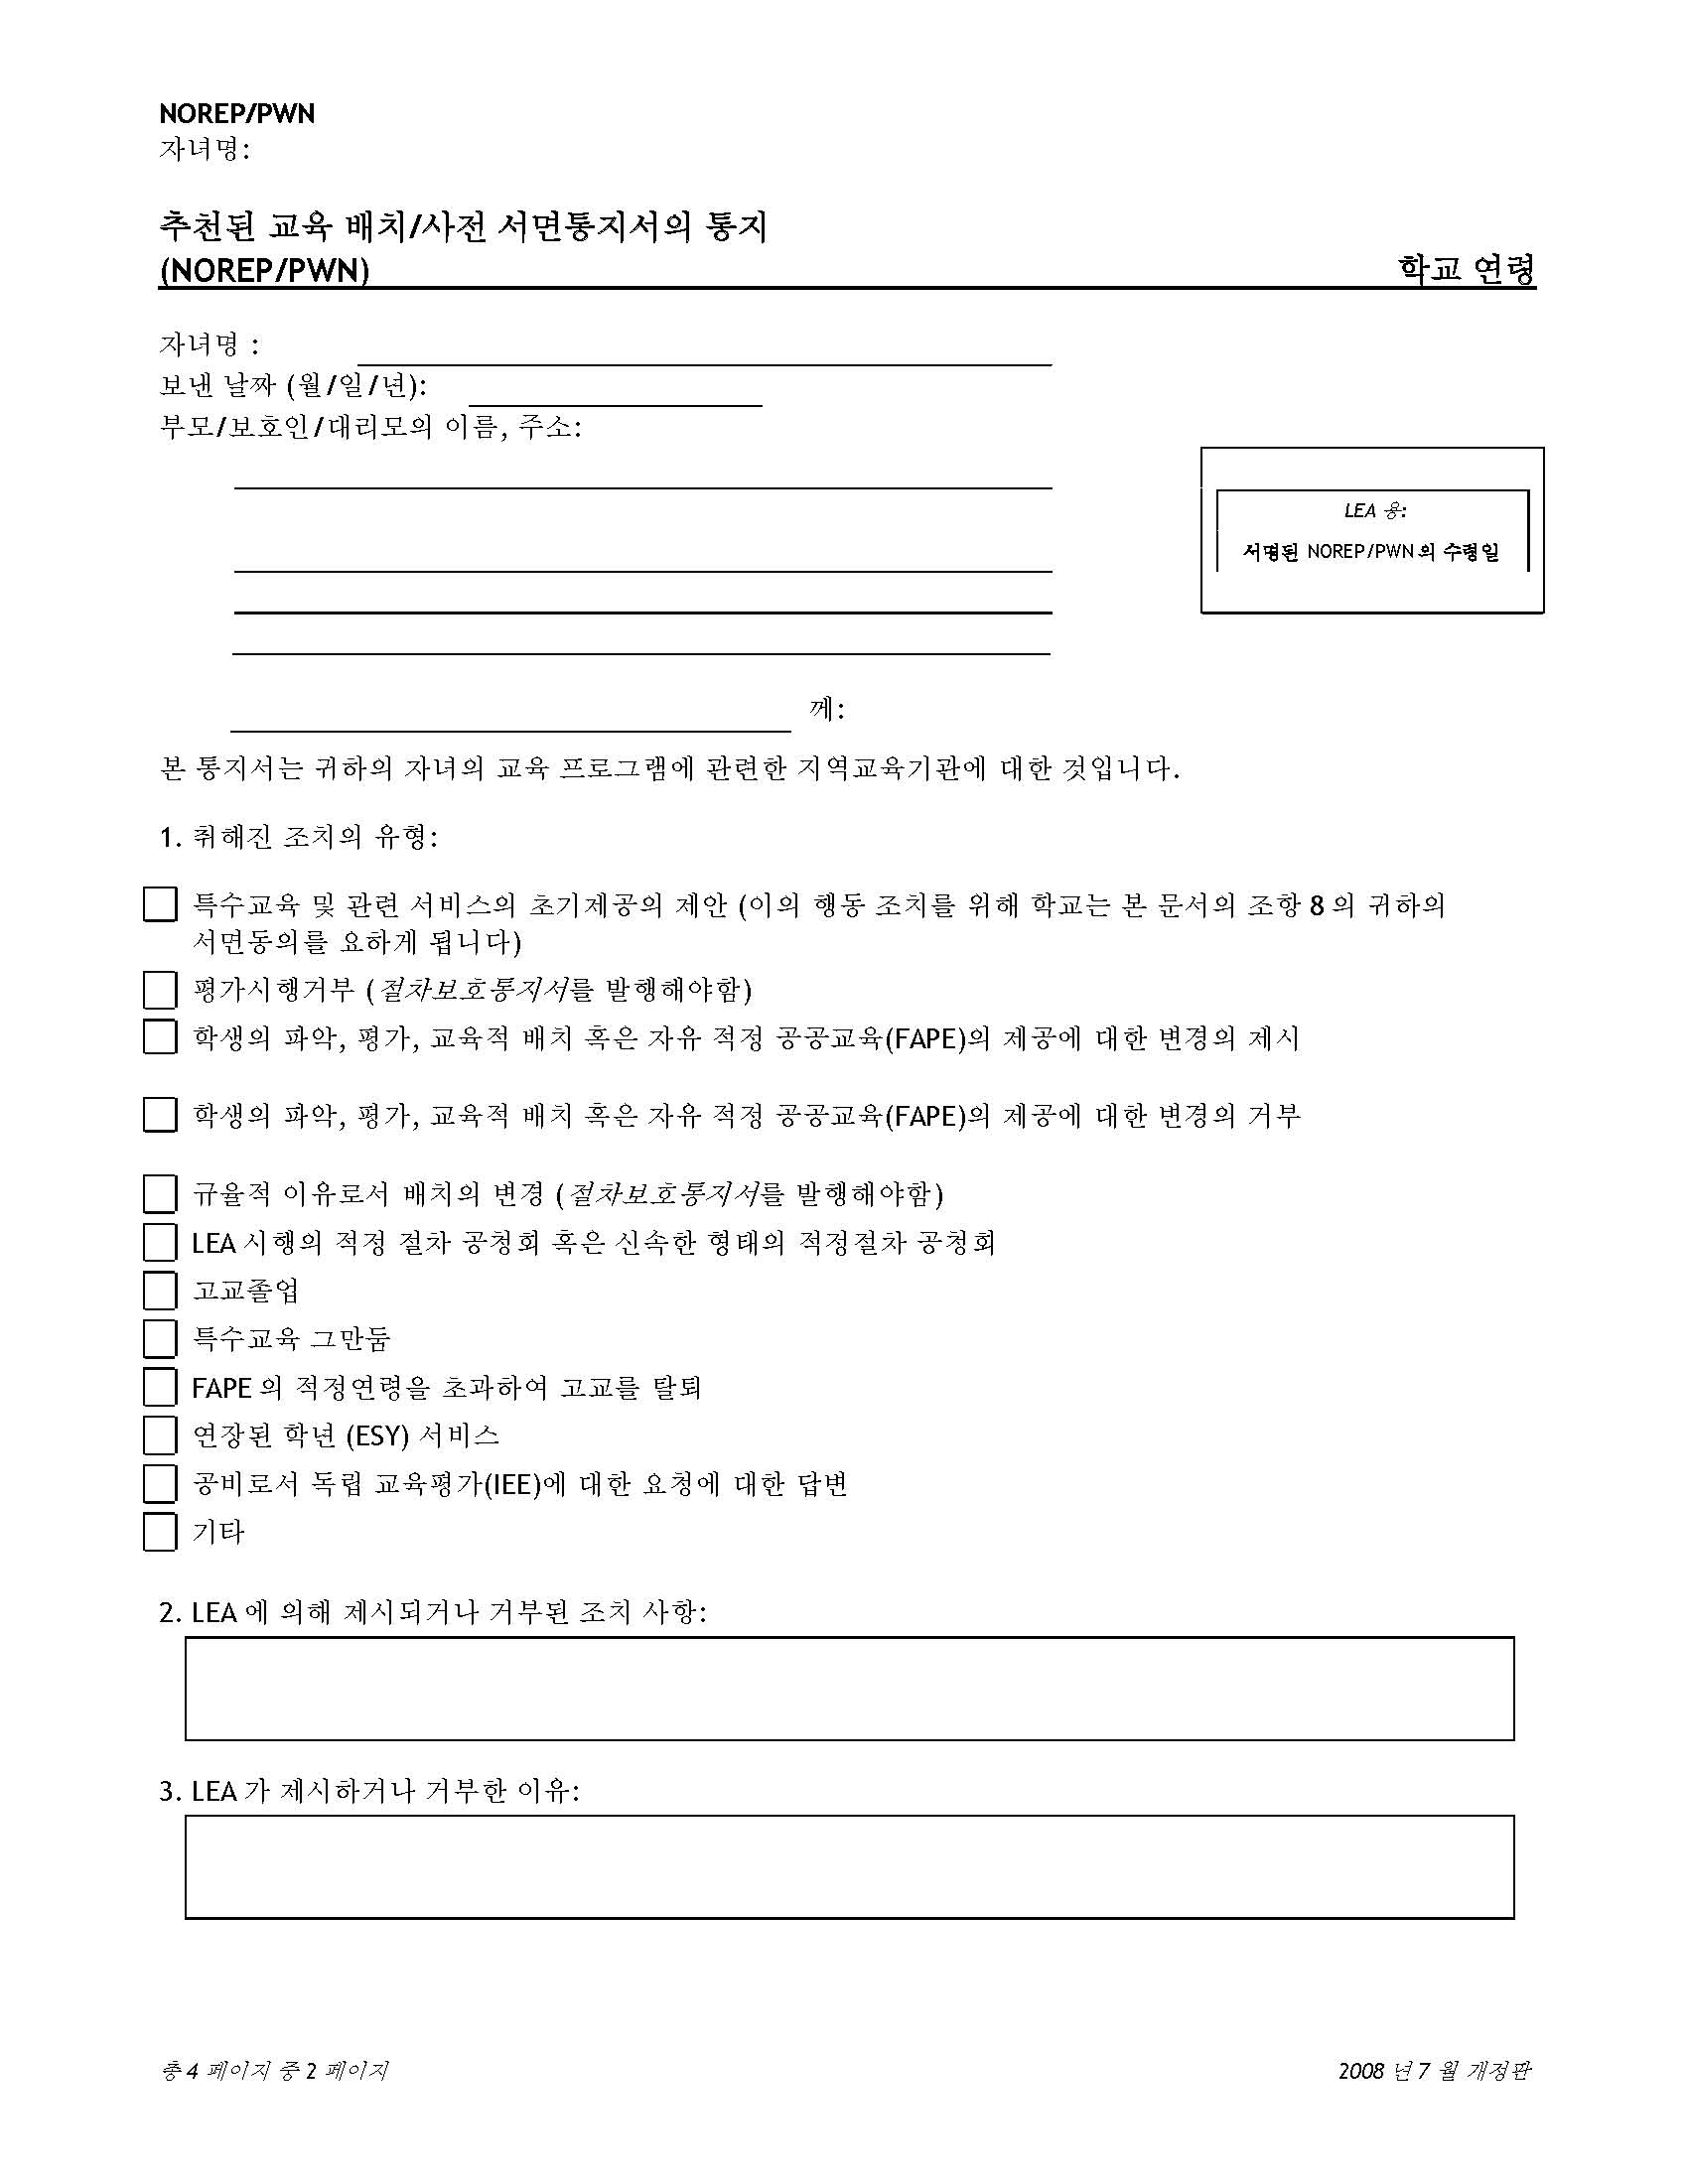 NOTICE OF RECOMMENDED EDUCATIONAL PLACEMENT/PRIOR WRITTEN NOTICE (NOREP/PWN) - School Age - Korean 